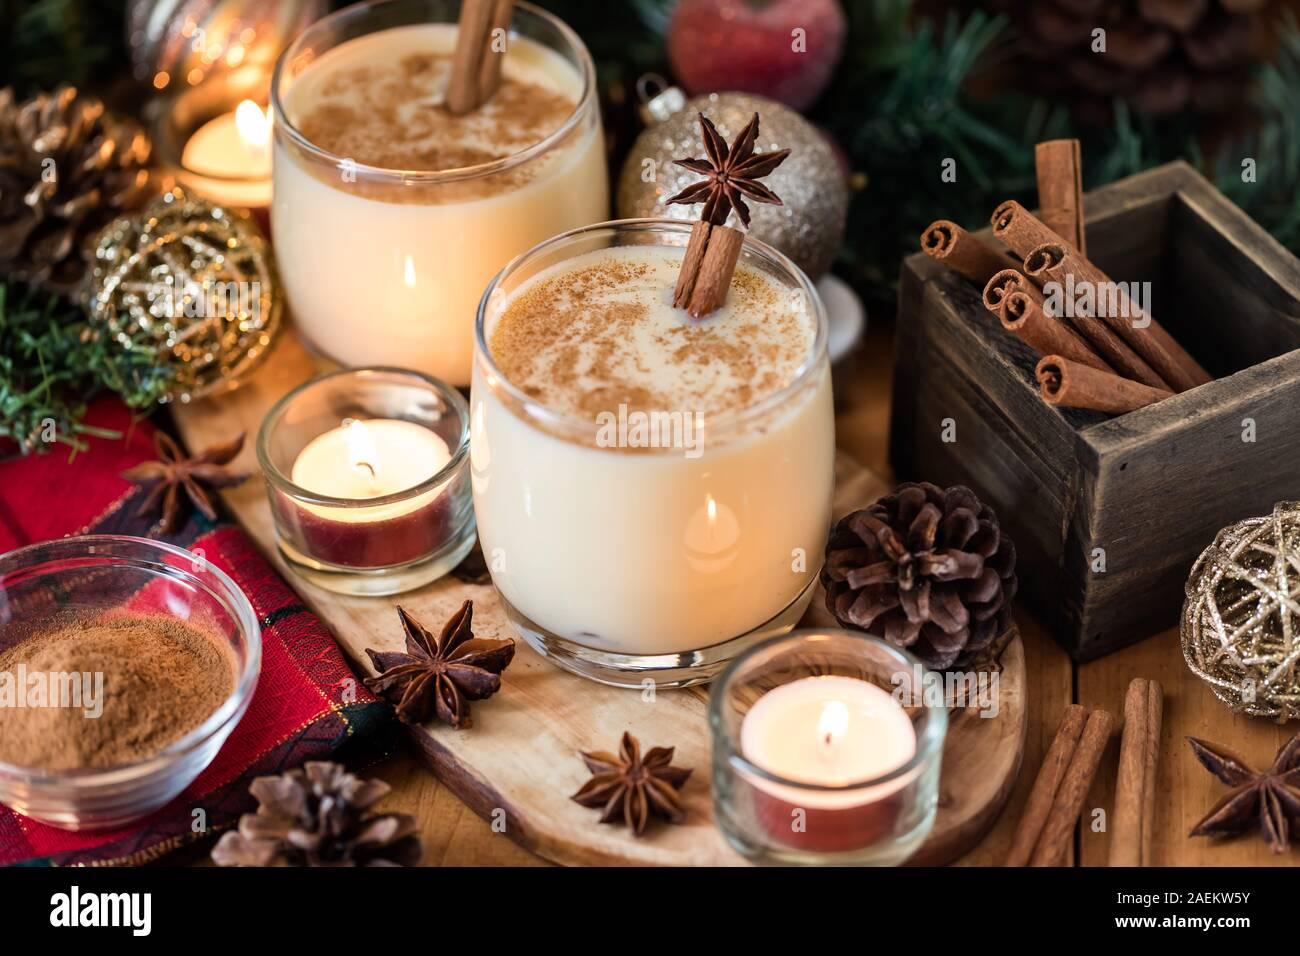 A close up view of two glasses of egg nog with cinnamon and star anise and surrounded by Christmas ornaments and candles. Stock Photo